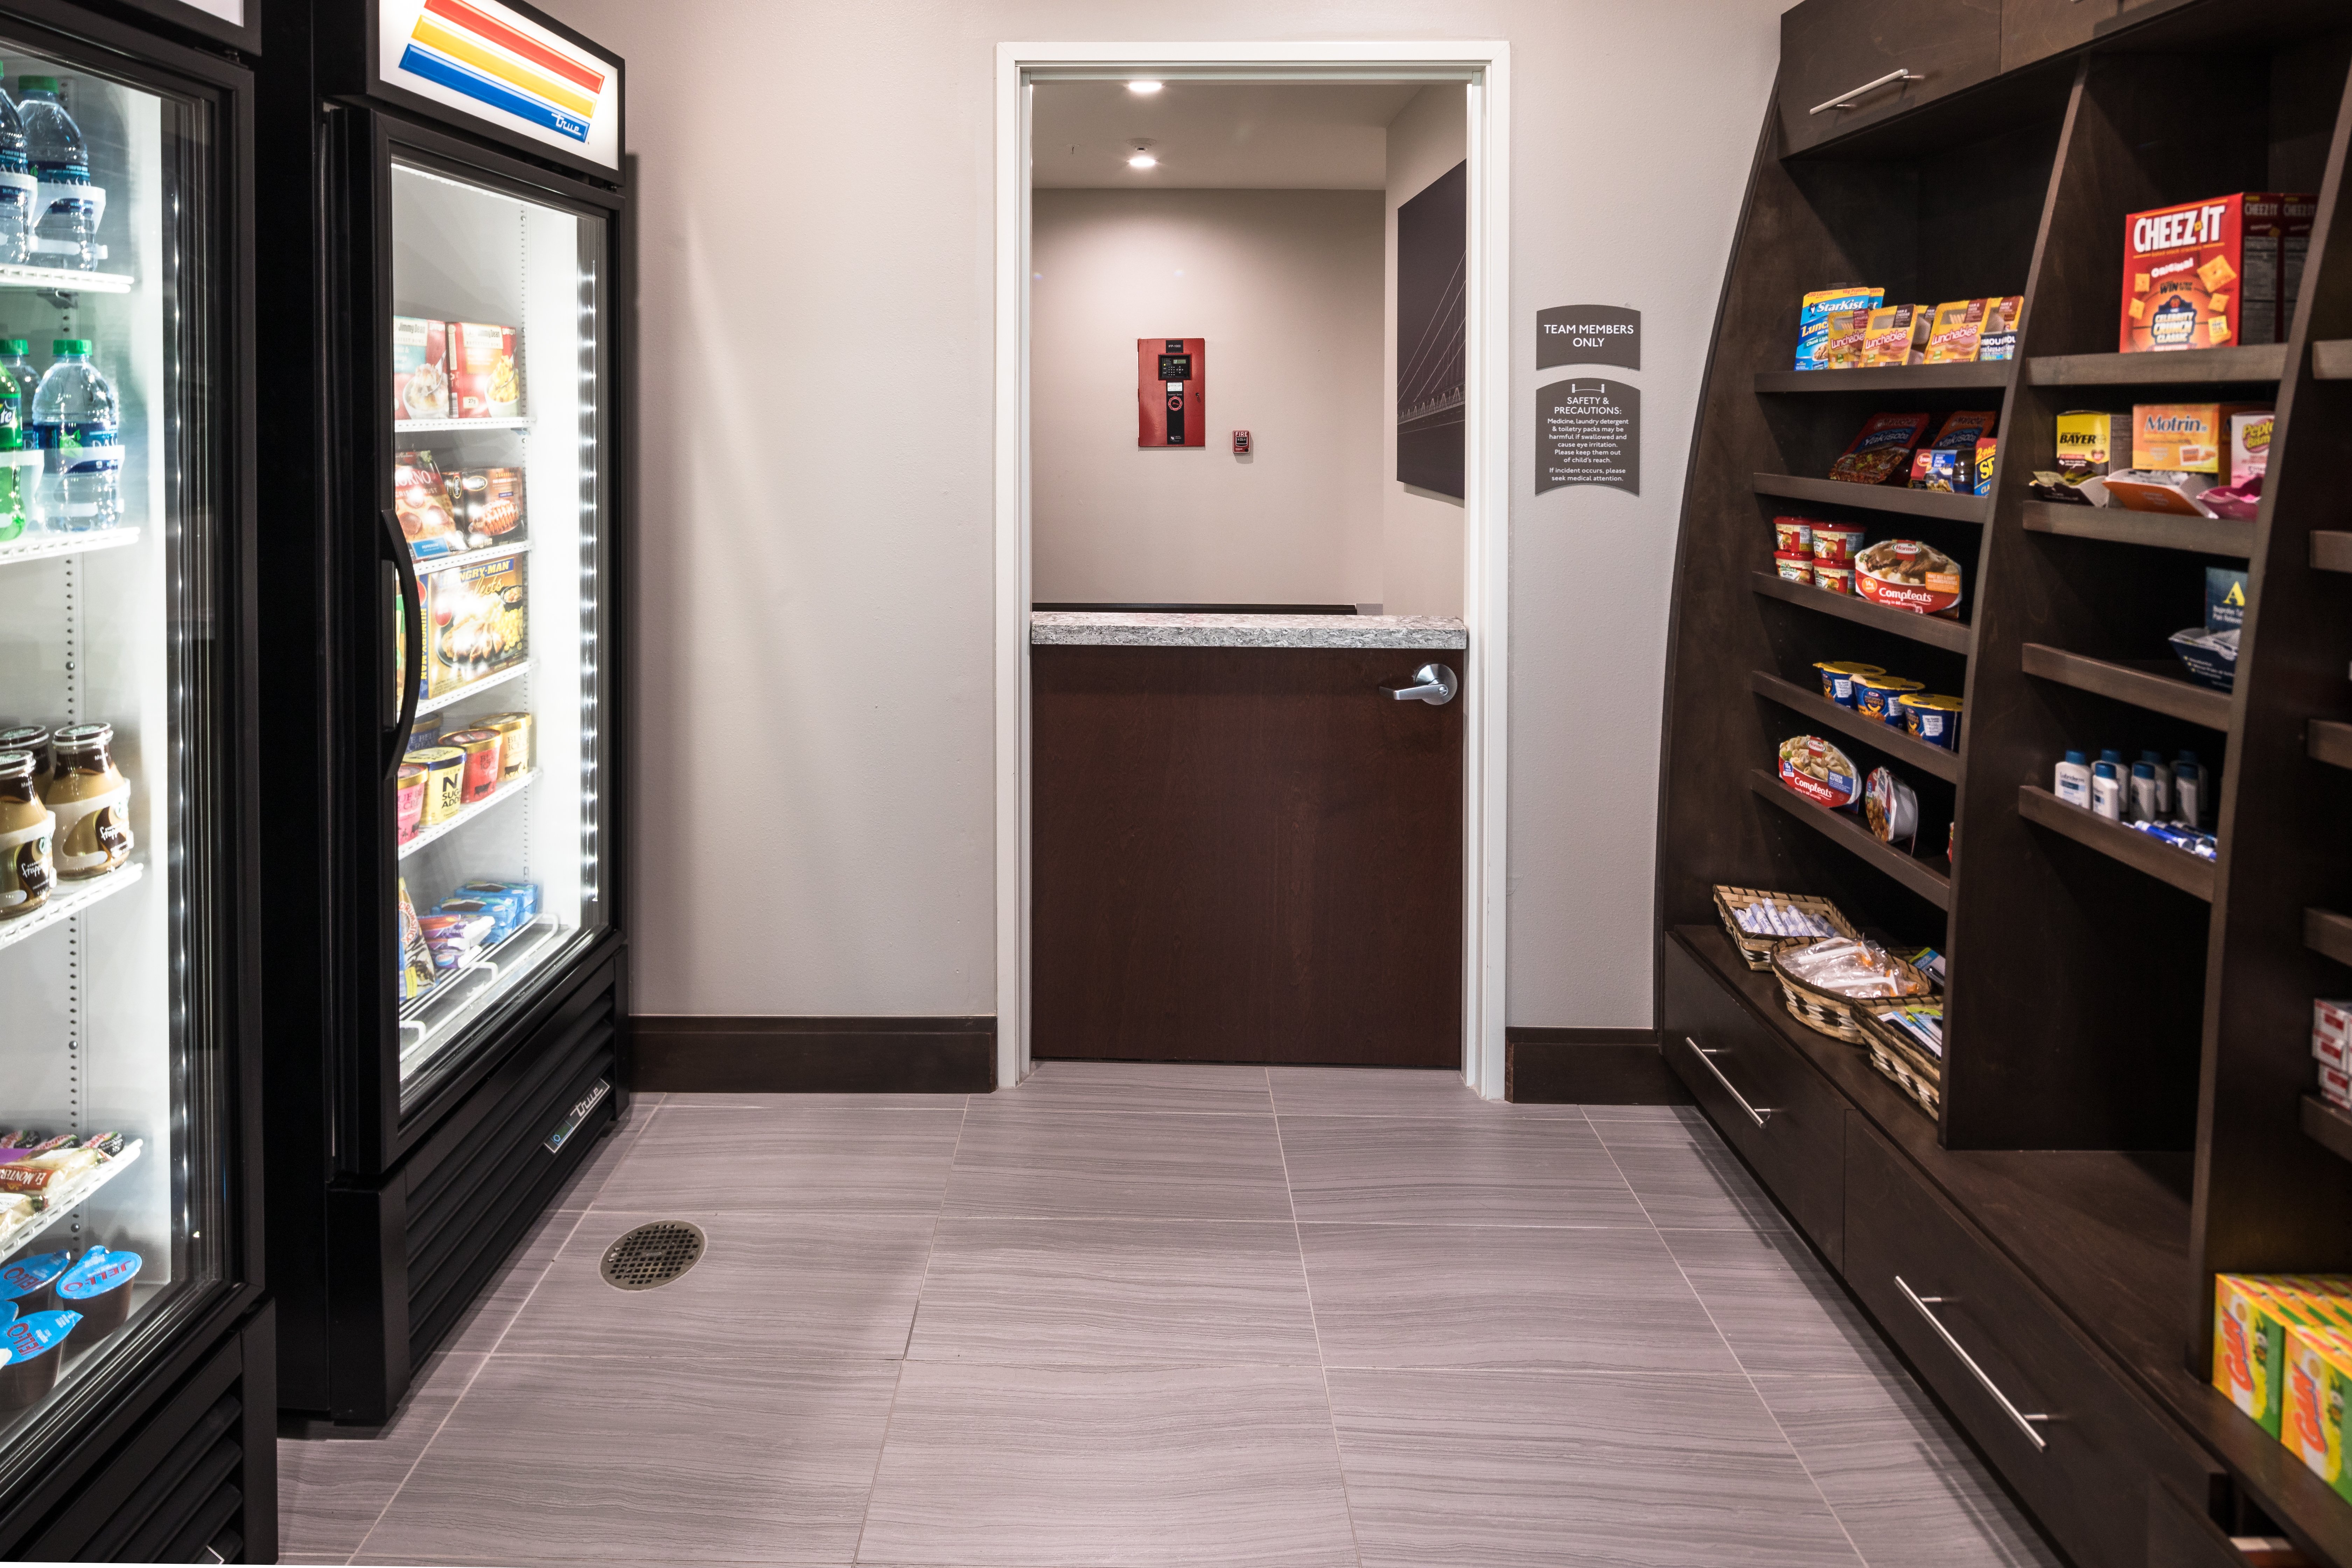 Grab a snack or a meal from The Pantry!